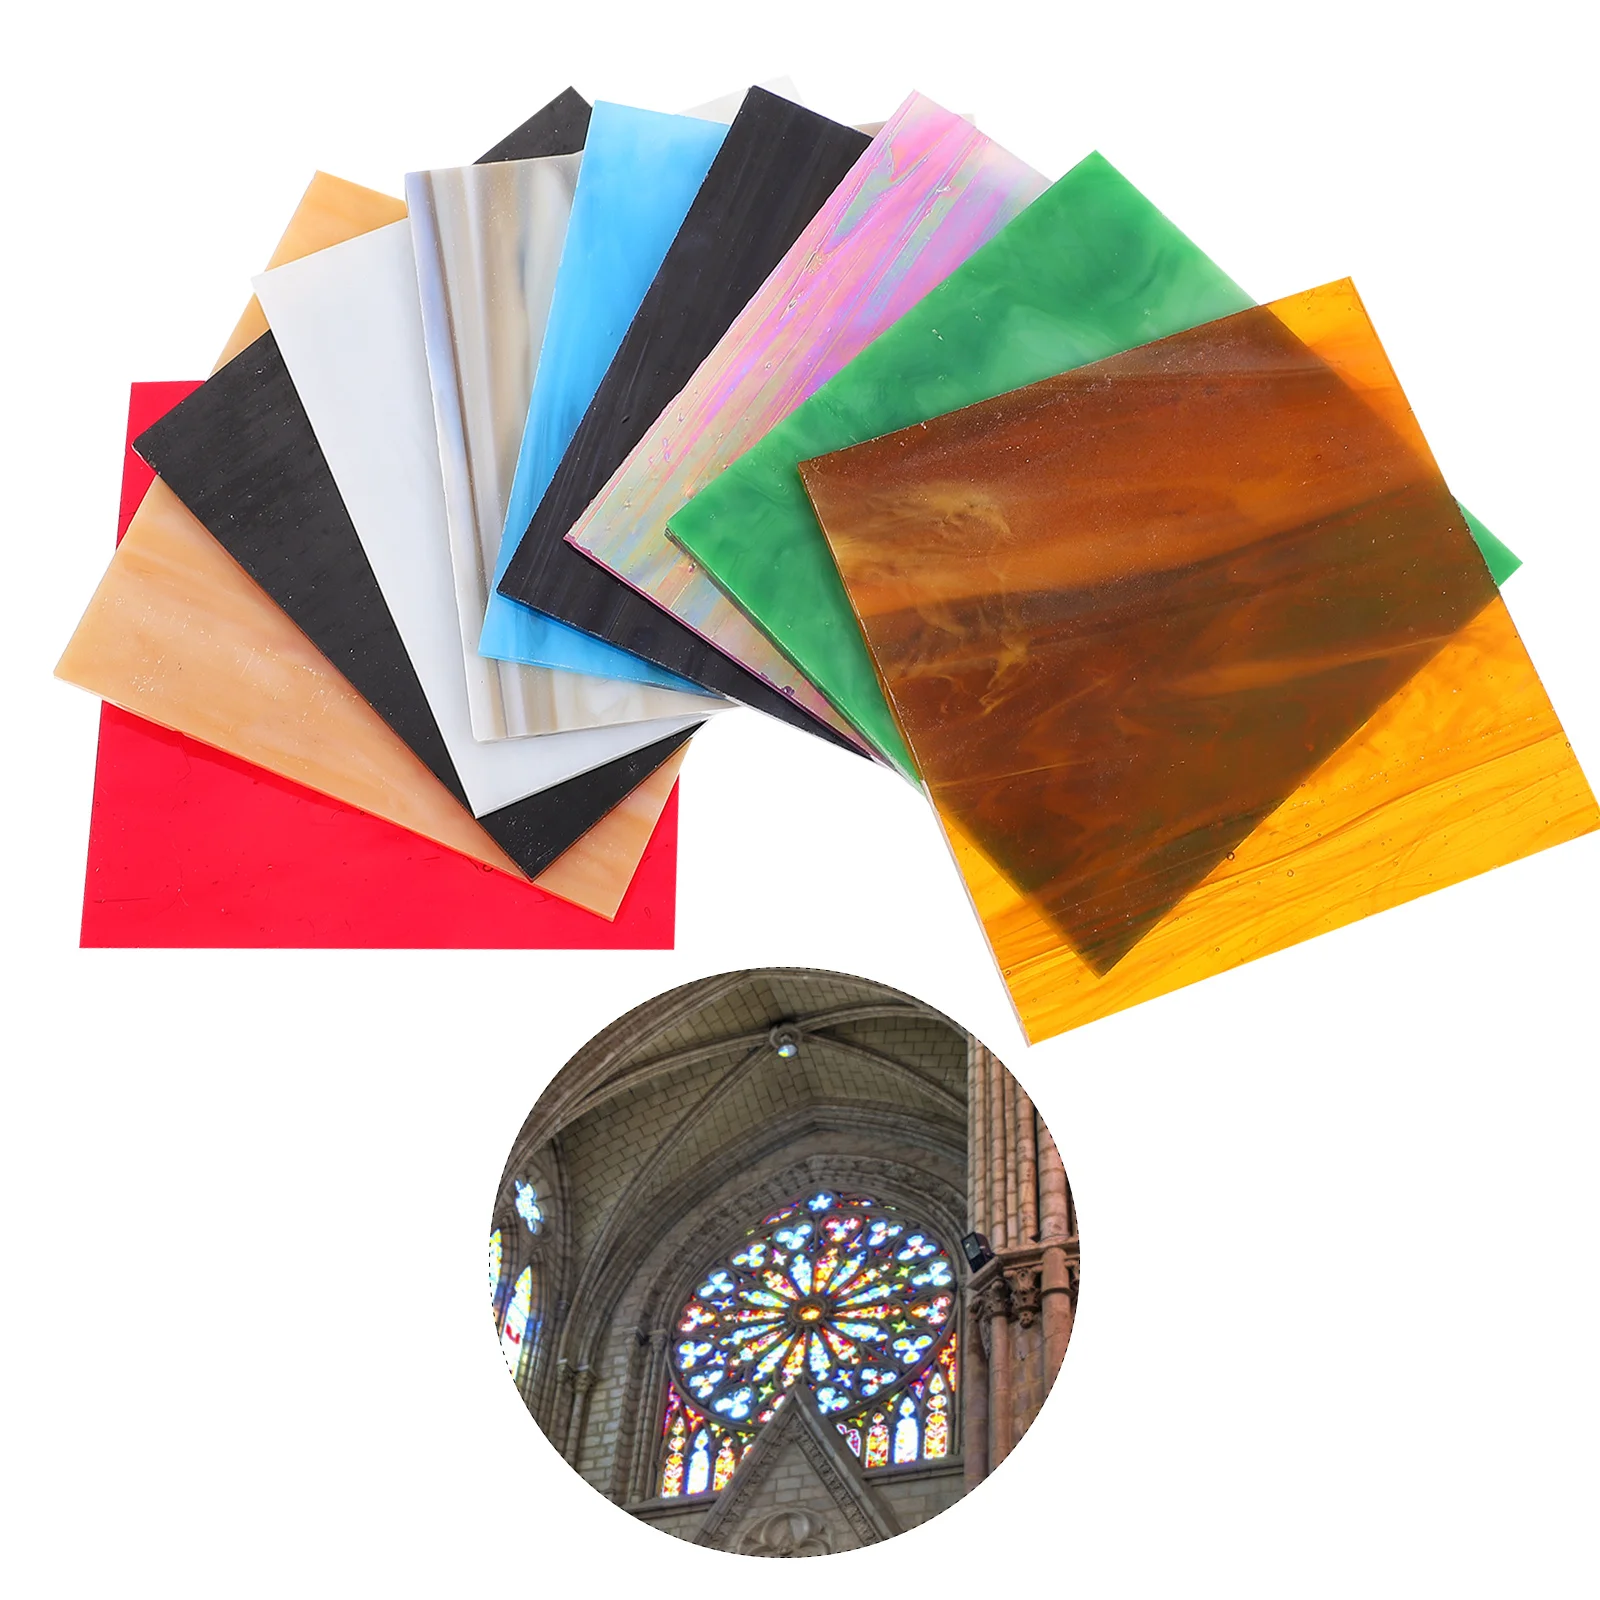 

10 Pcs Mix Tiles Stained Glass Mosaic Tiles Mosaic Tiles Glass Mosaic Wall Tile Glass Mosaic Tiles Cathedral Mosaic Glass